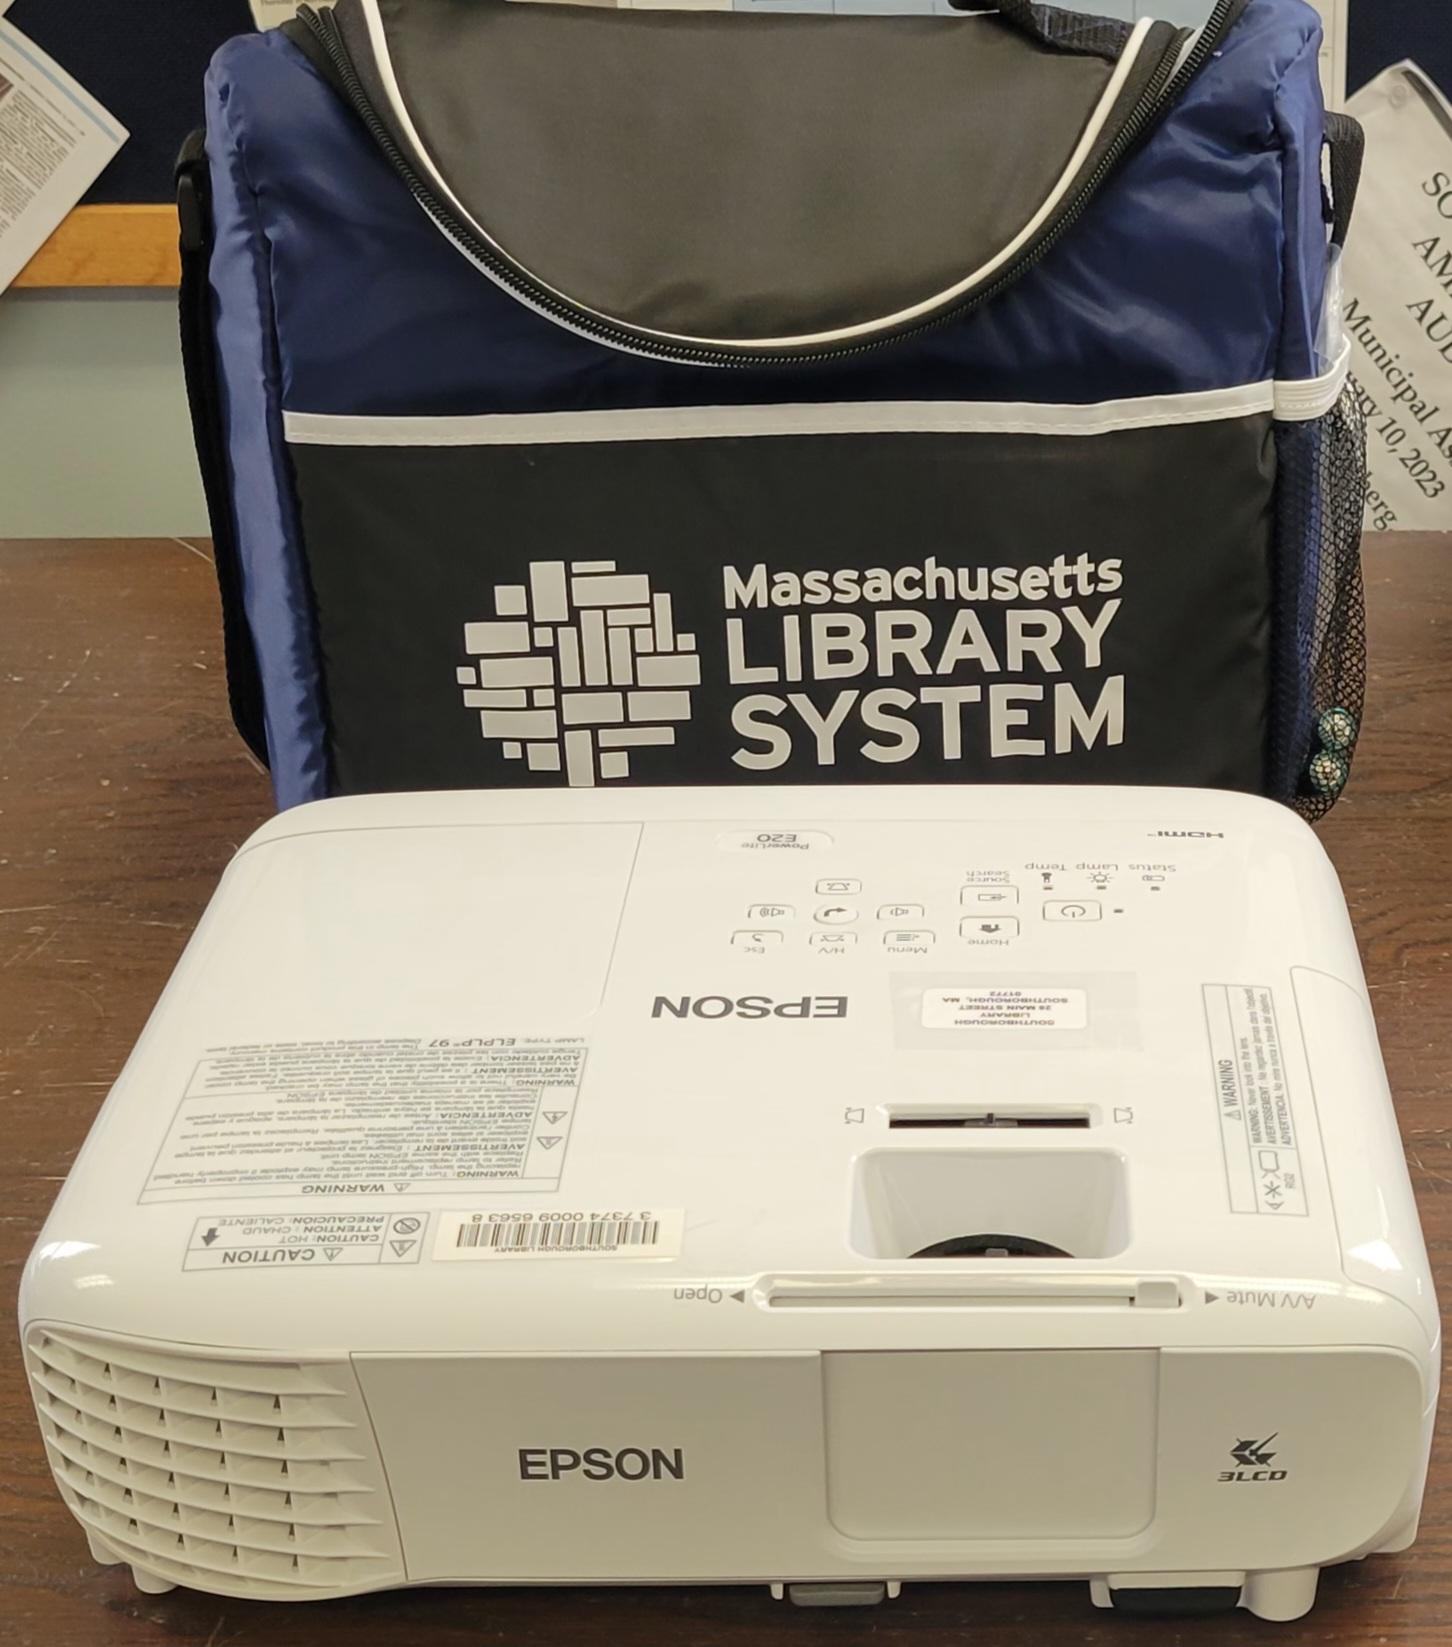 Epson Projector in front of case